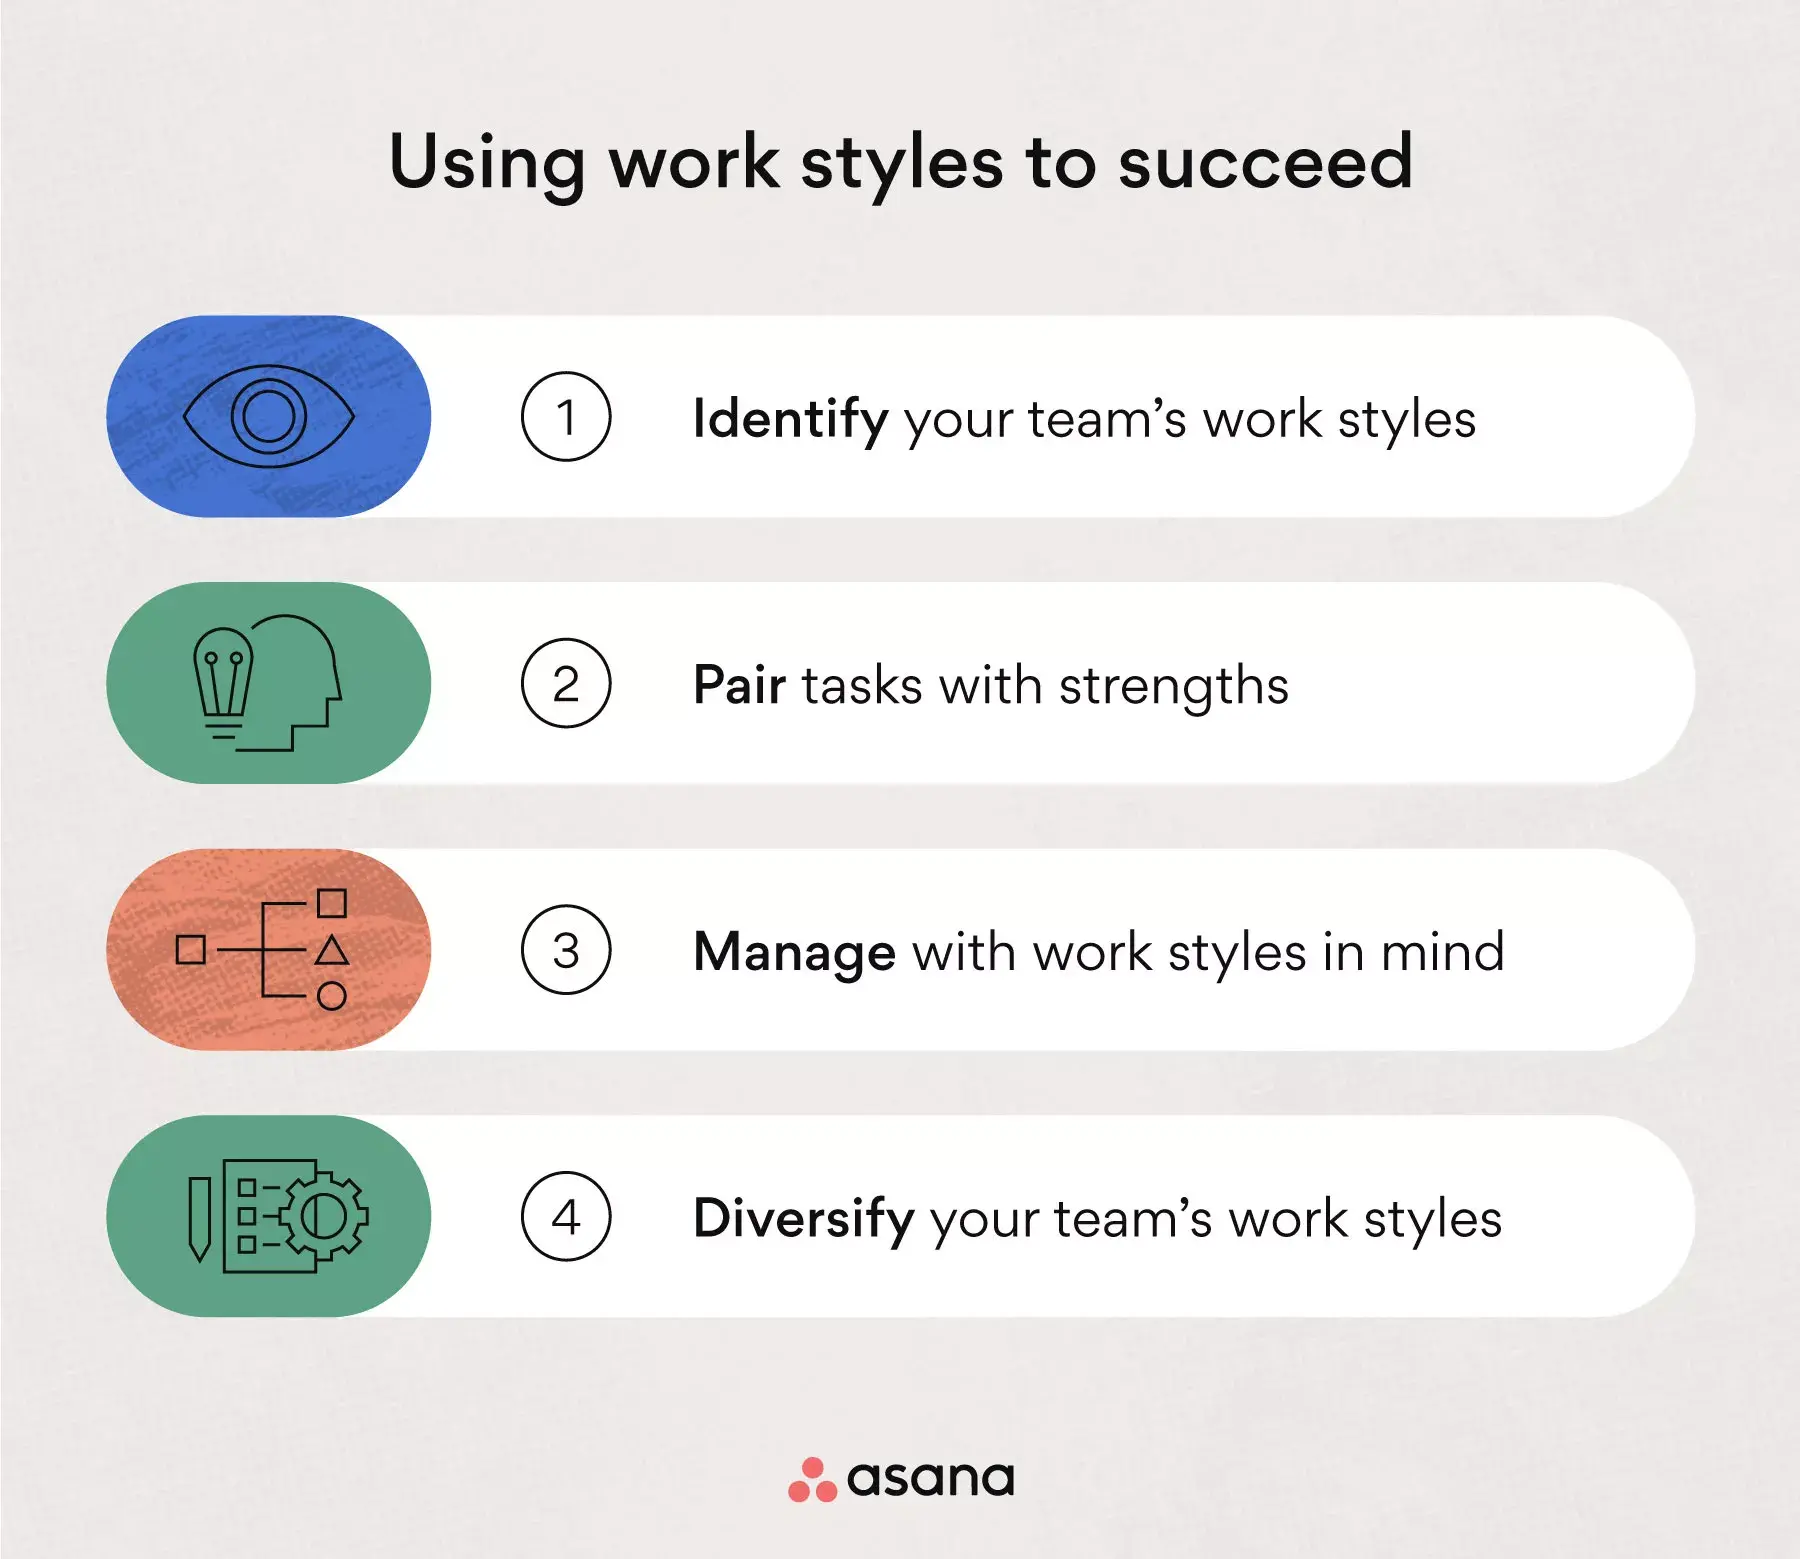 [inline illustration] Using work styles to succeed (infographic)